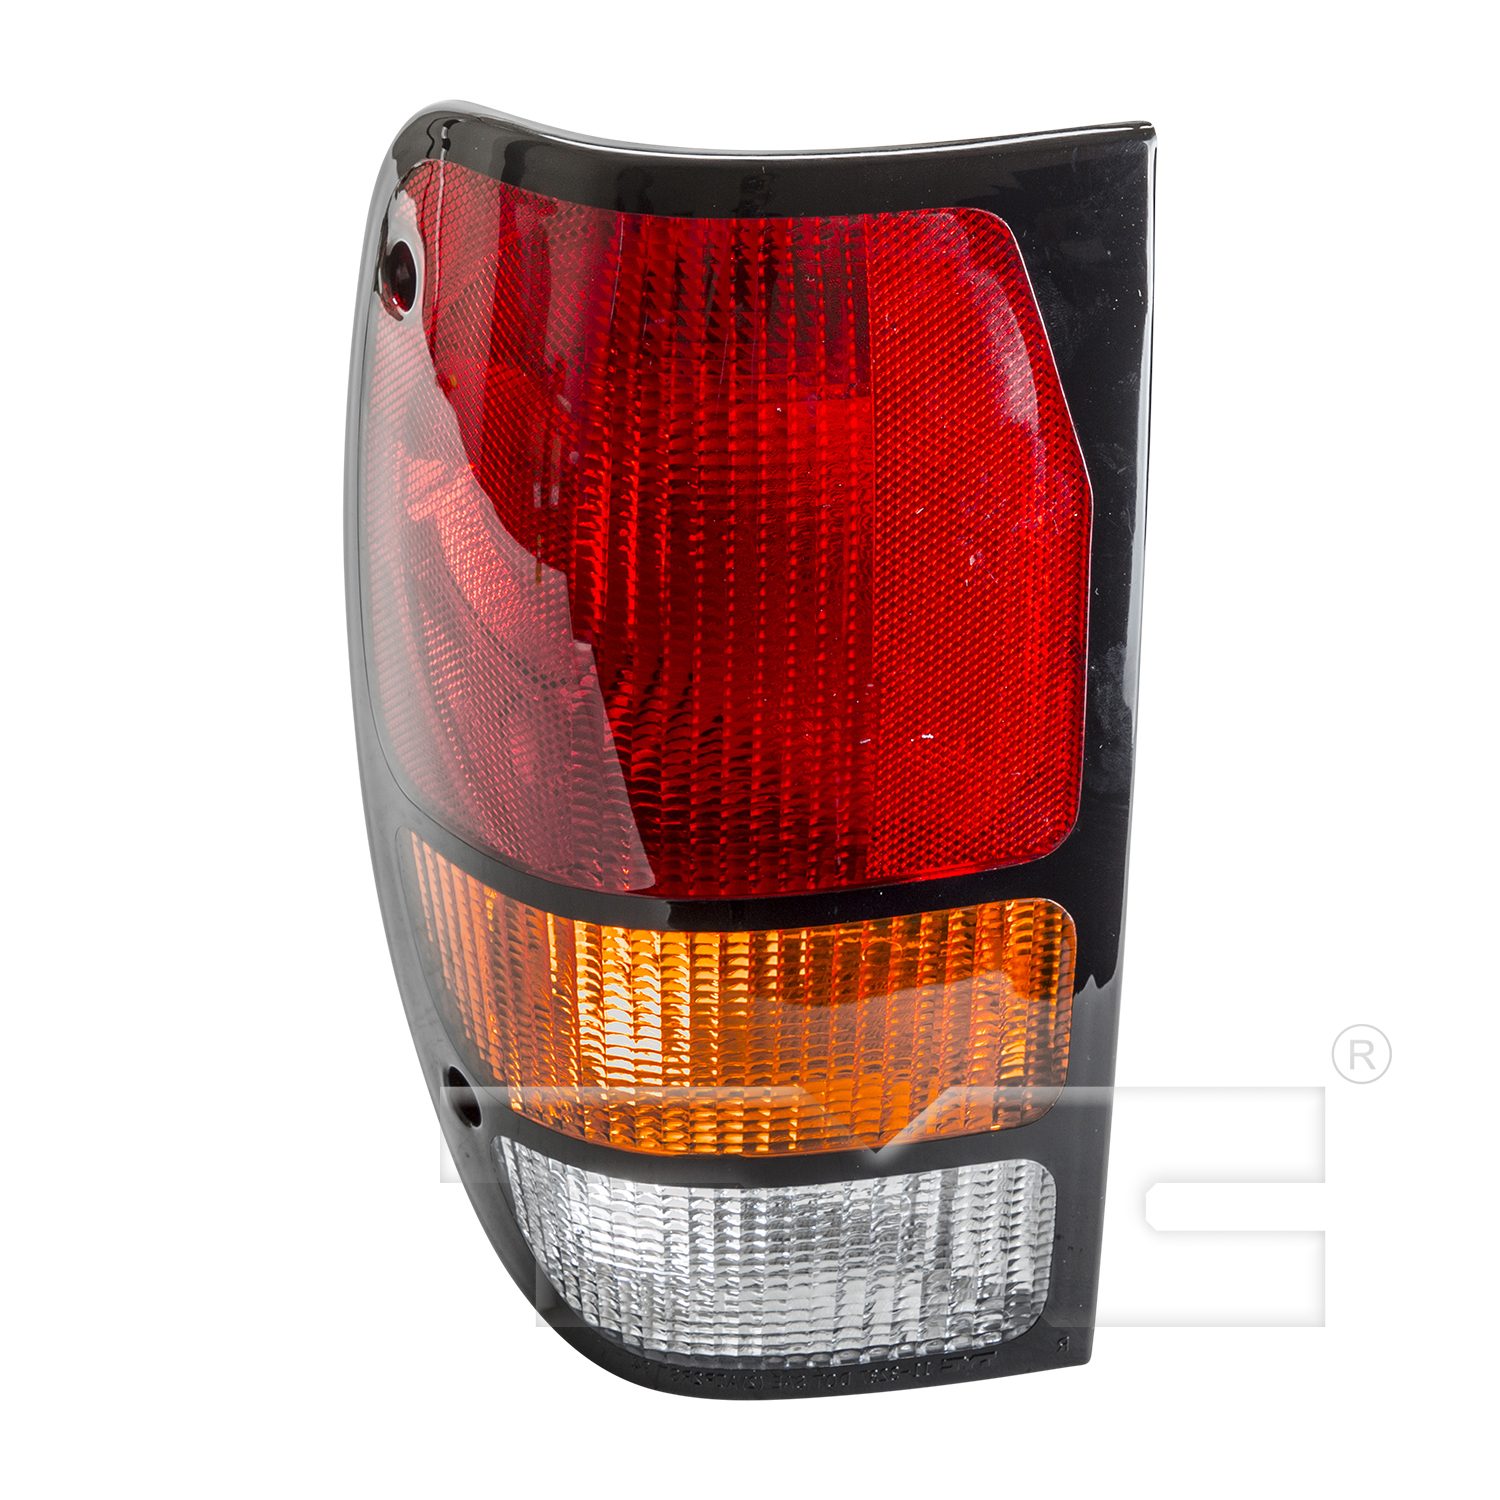 Aftermarket TAILLIGHTS for MAZDA - B2300, B2300,94-00,LT Taillamp assy